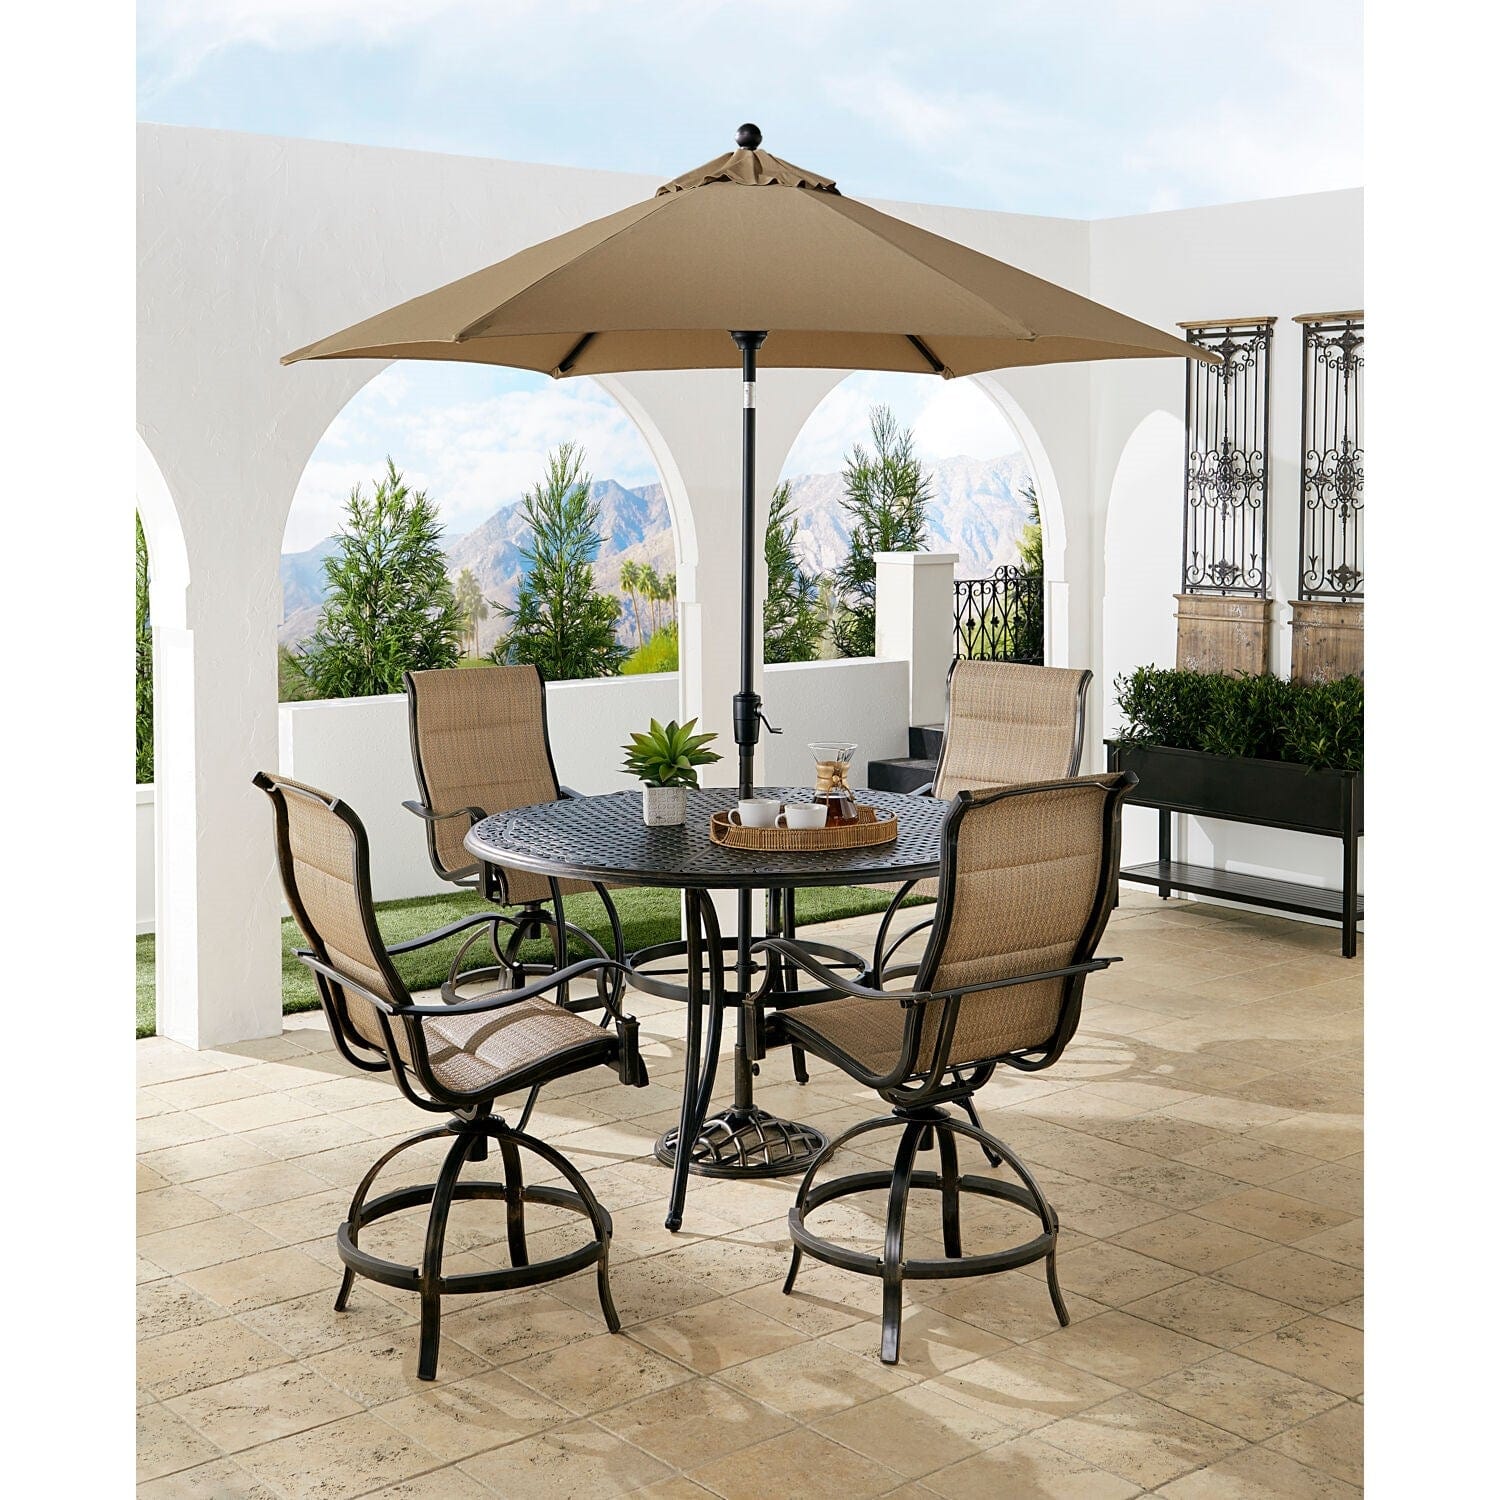 Hanover Outdoor Dining Set Hanover Traditions 5-Piece Aluminium Frame High-Dining Set in Tan with 4 Swivel Counter-Height Chairs, 56-in. Table, and 9-ft. Umbrella |  TRADDN5PCPDBR-SU-T